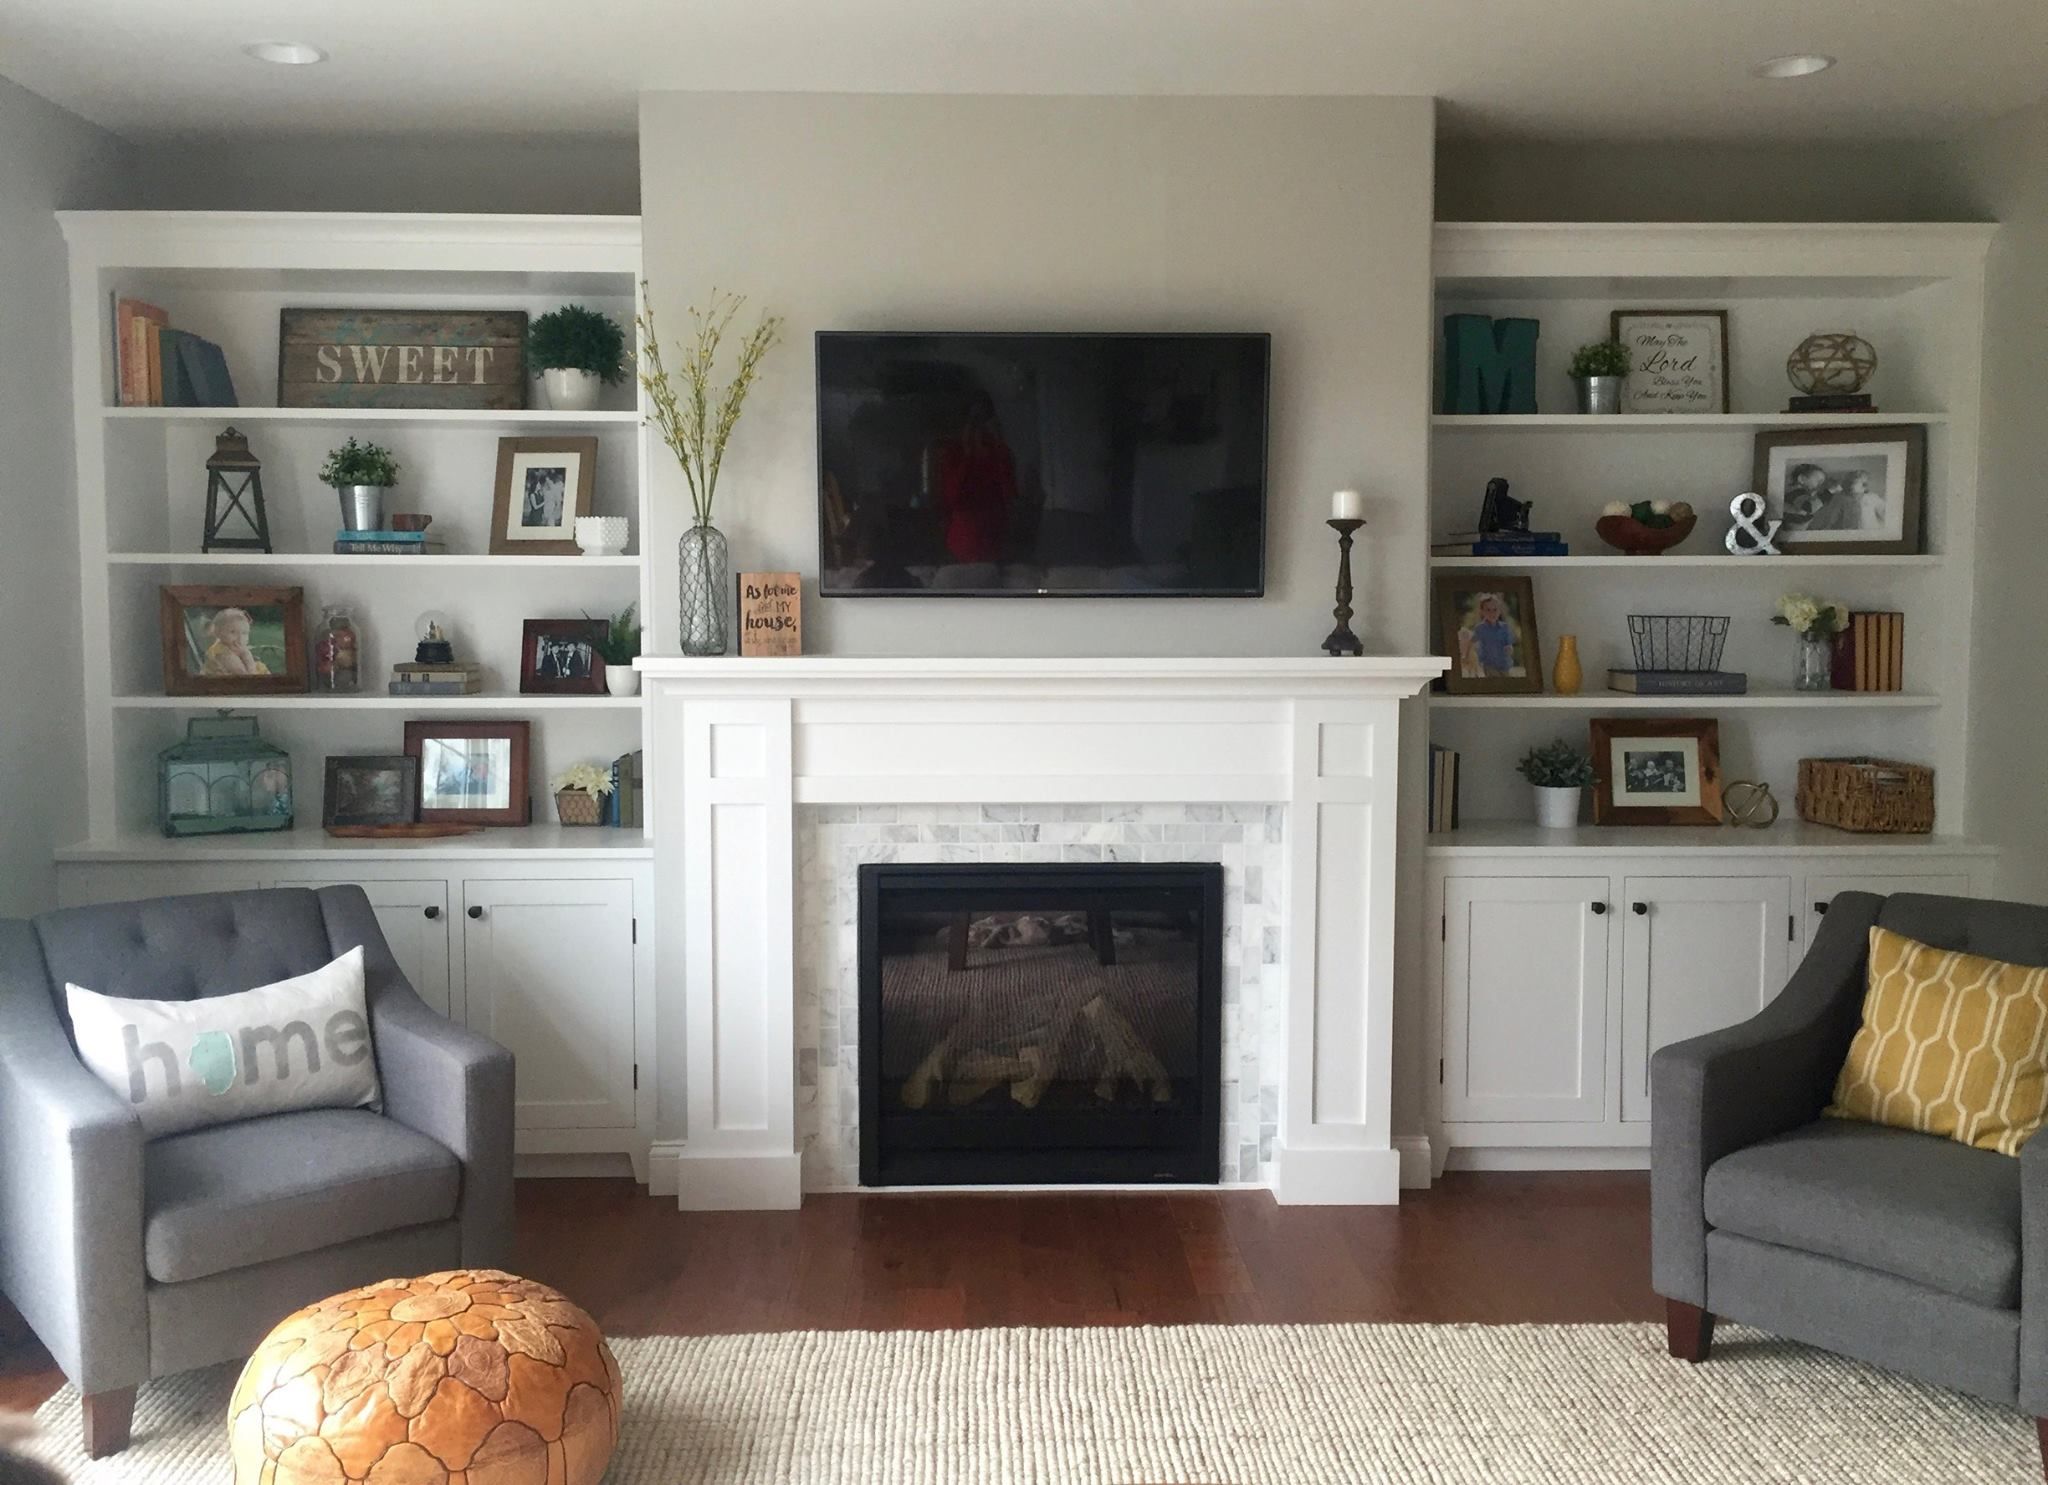 Built In Fireplace Cabinets Beautiful How to Build A Built In the Cabinets Woodworking